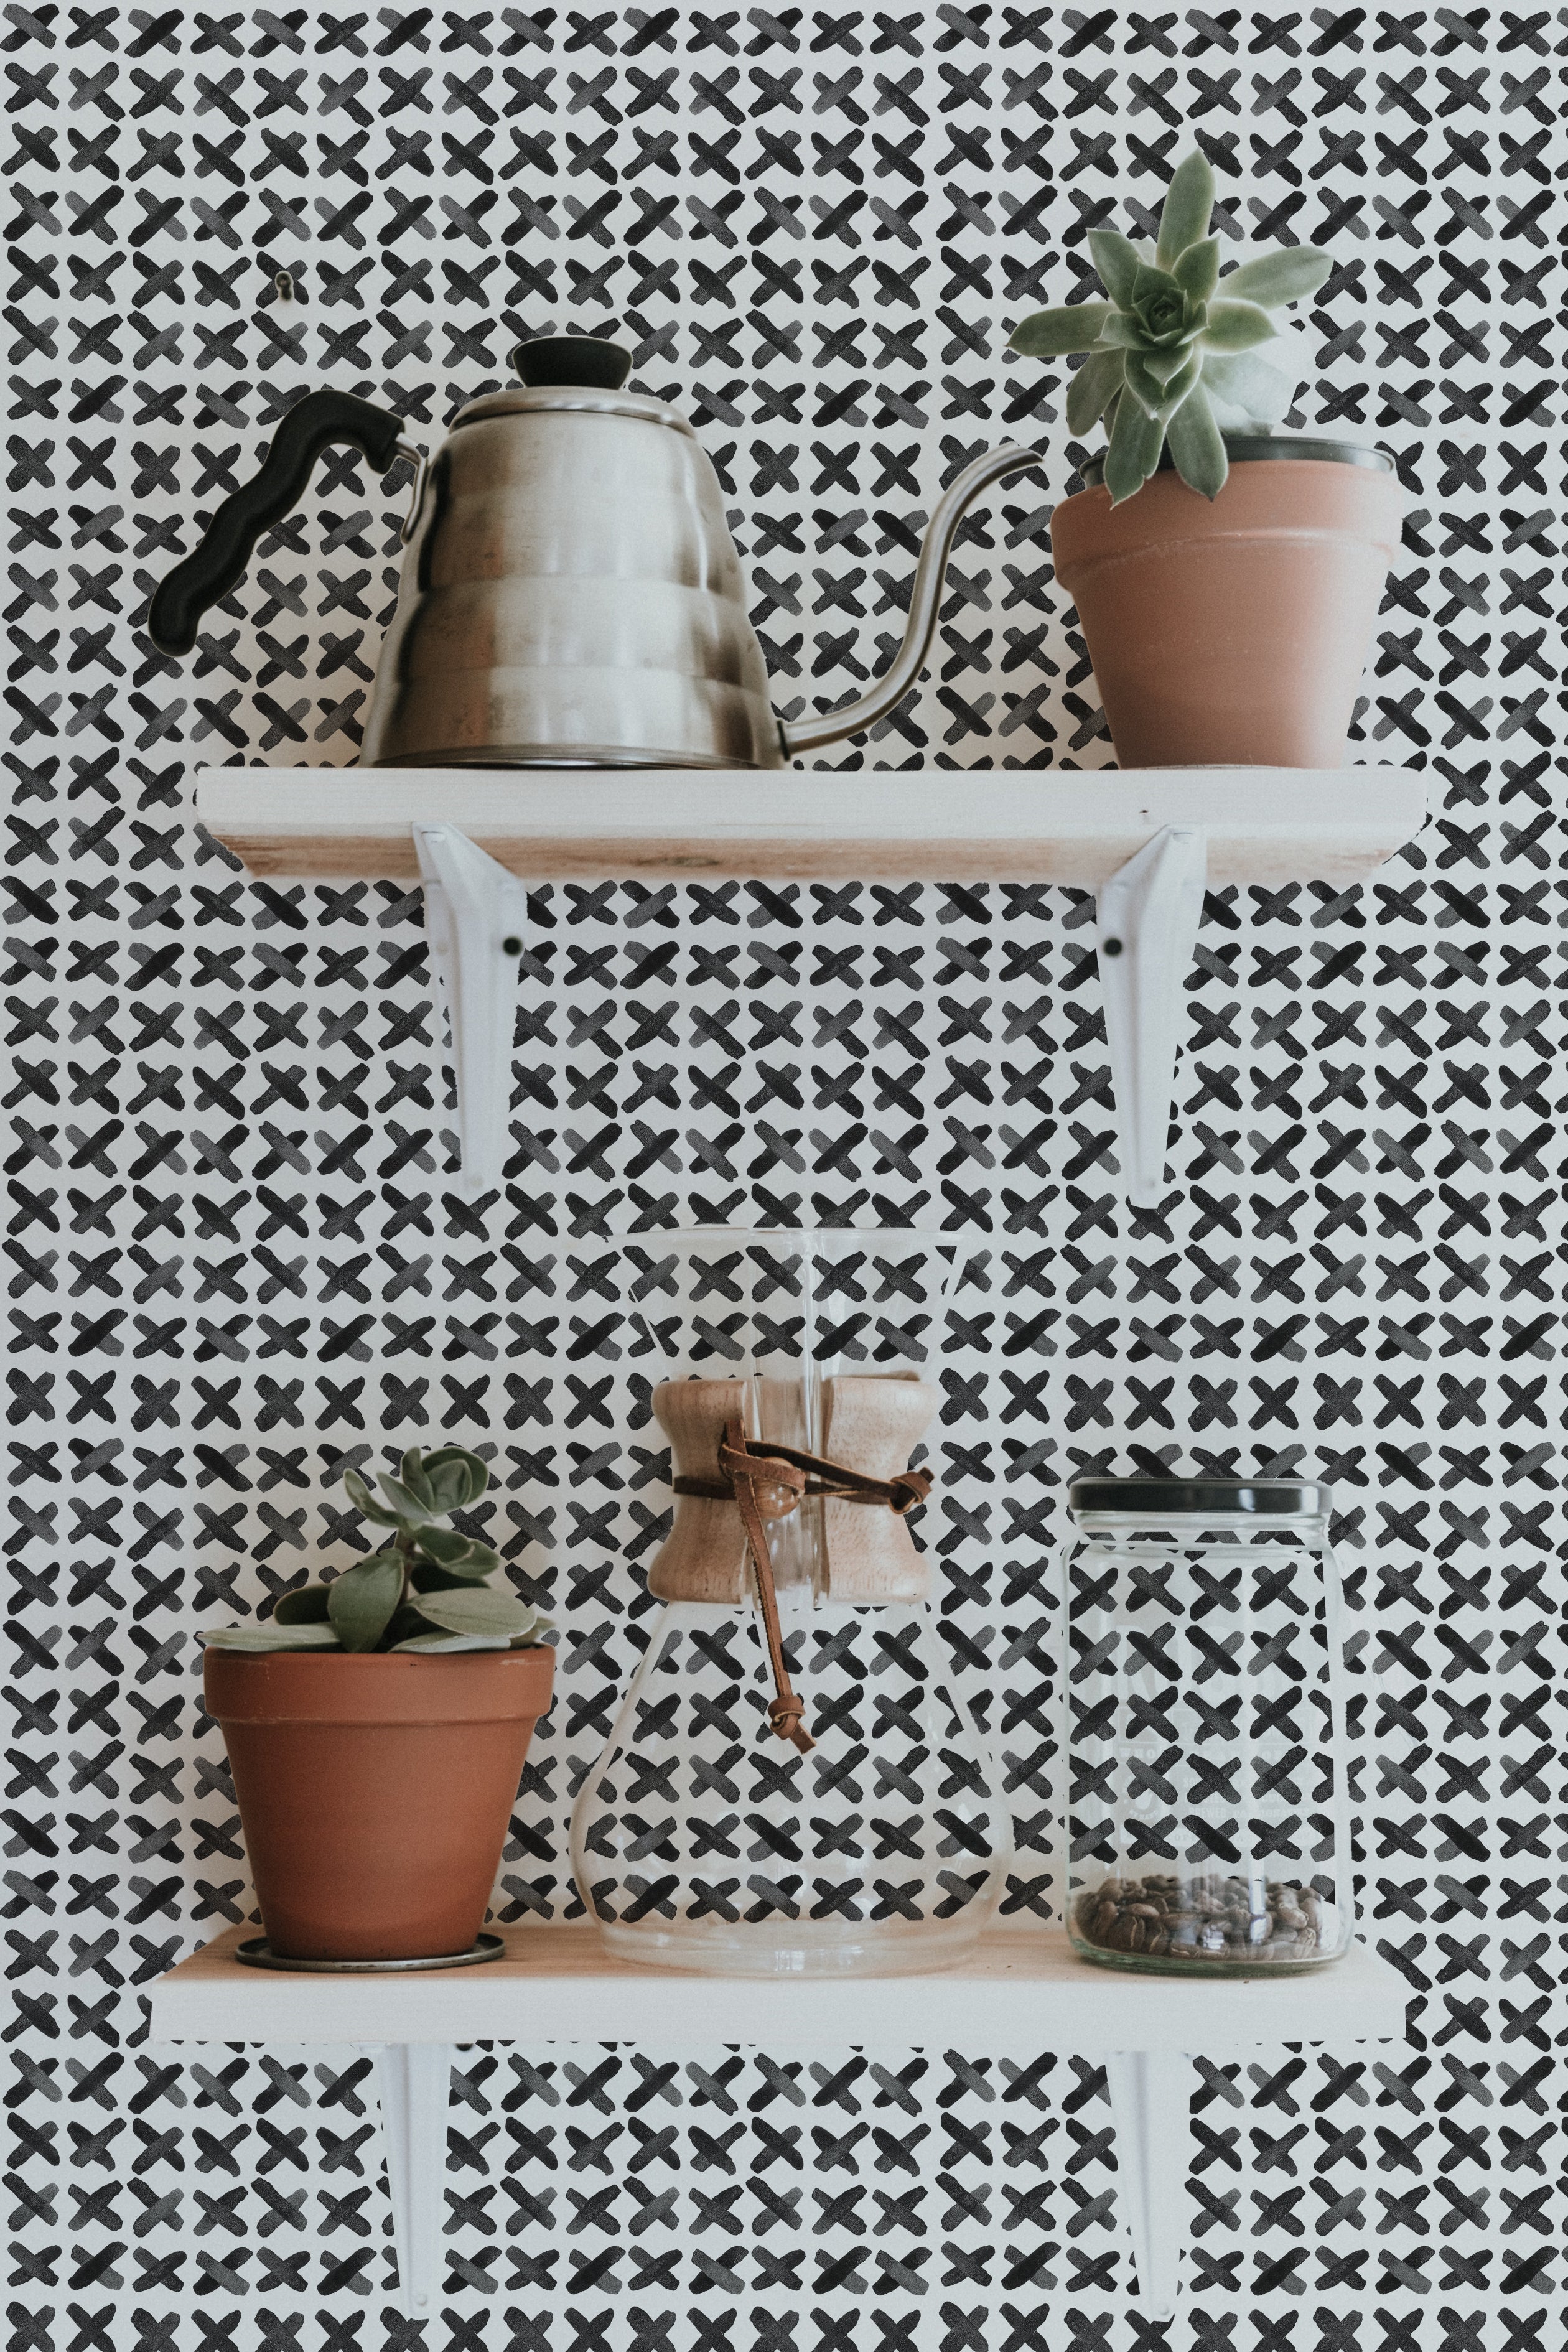 Decorative shelf against X Infinity Boho Wallpaper with black and white geometric pattern, displaying a vintage kettle and a potted succulent for a stylish home accent.